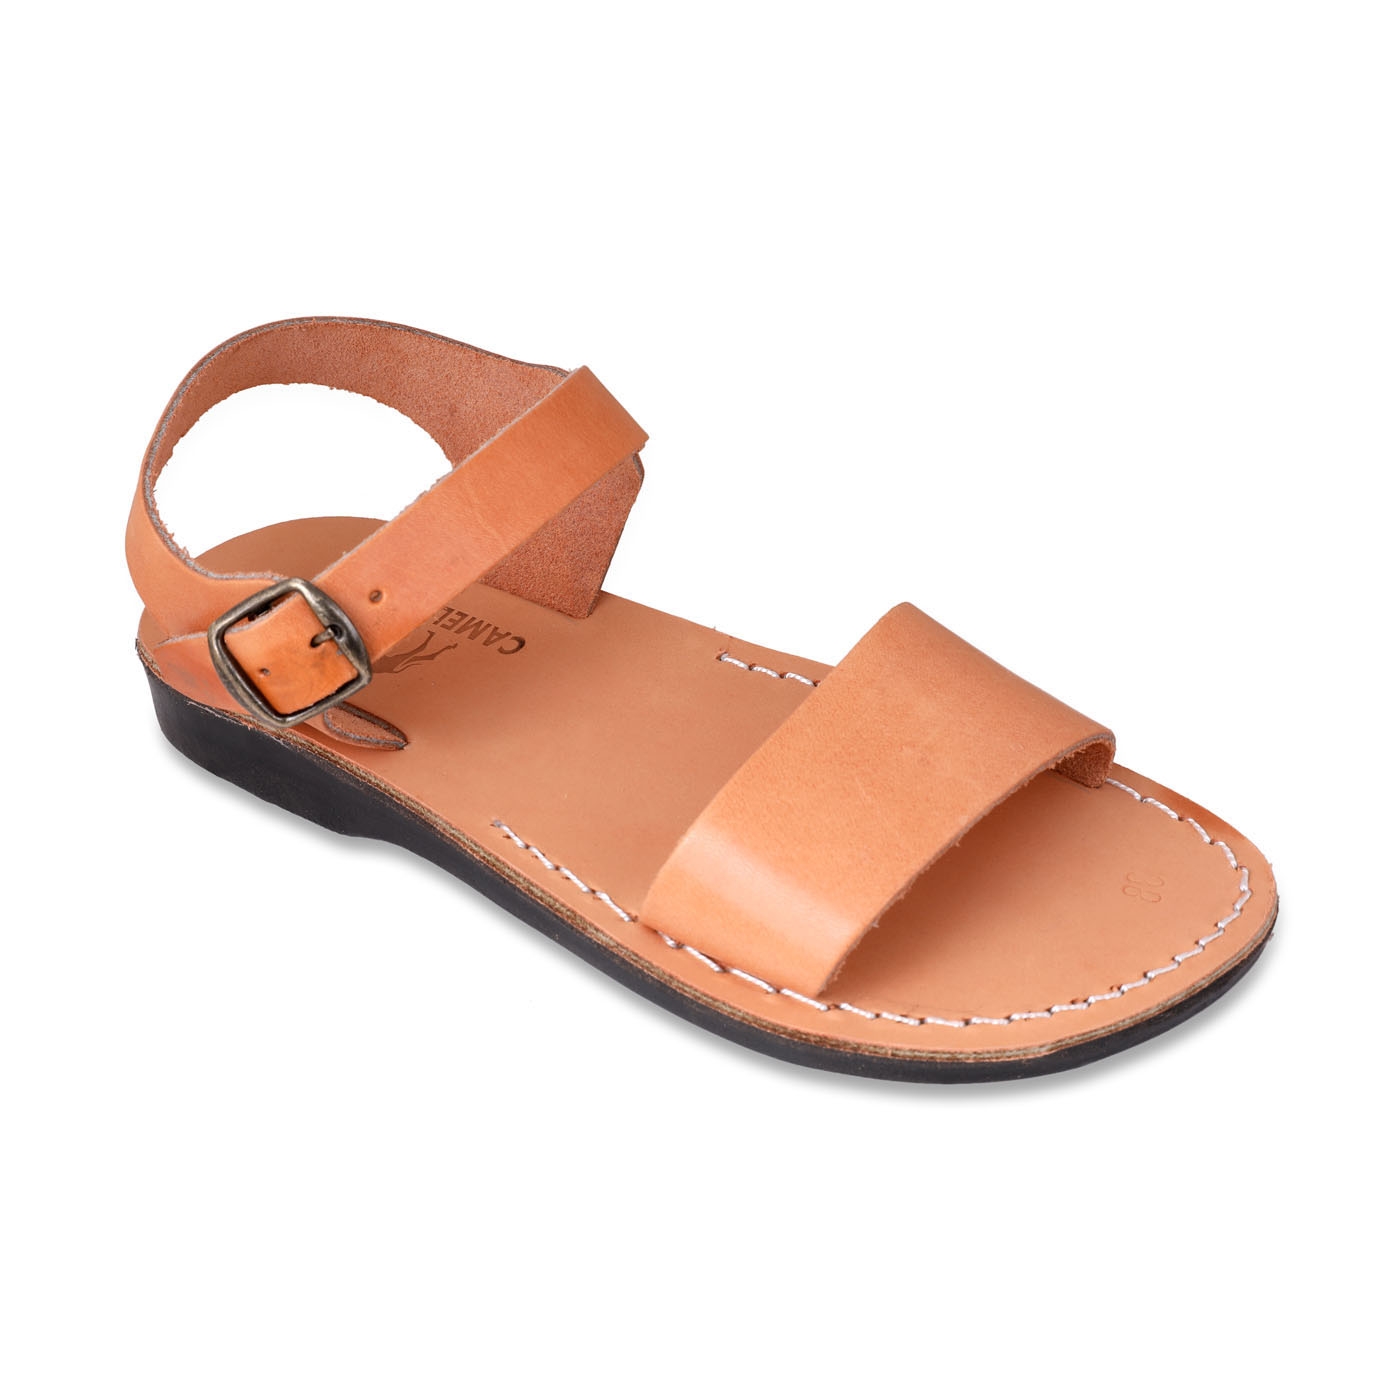 Moses Handmade Leather Sandals - 1